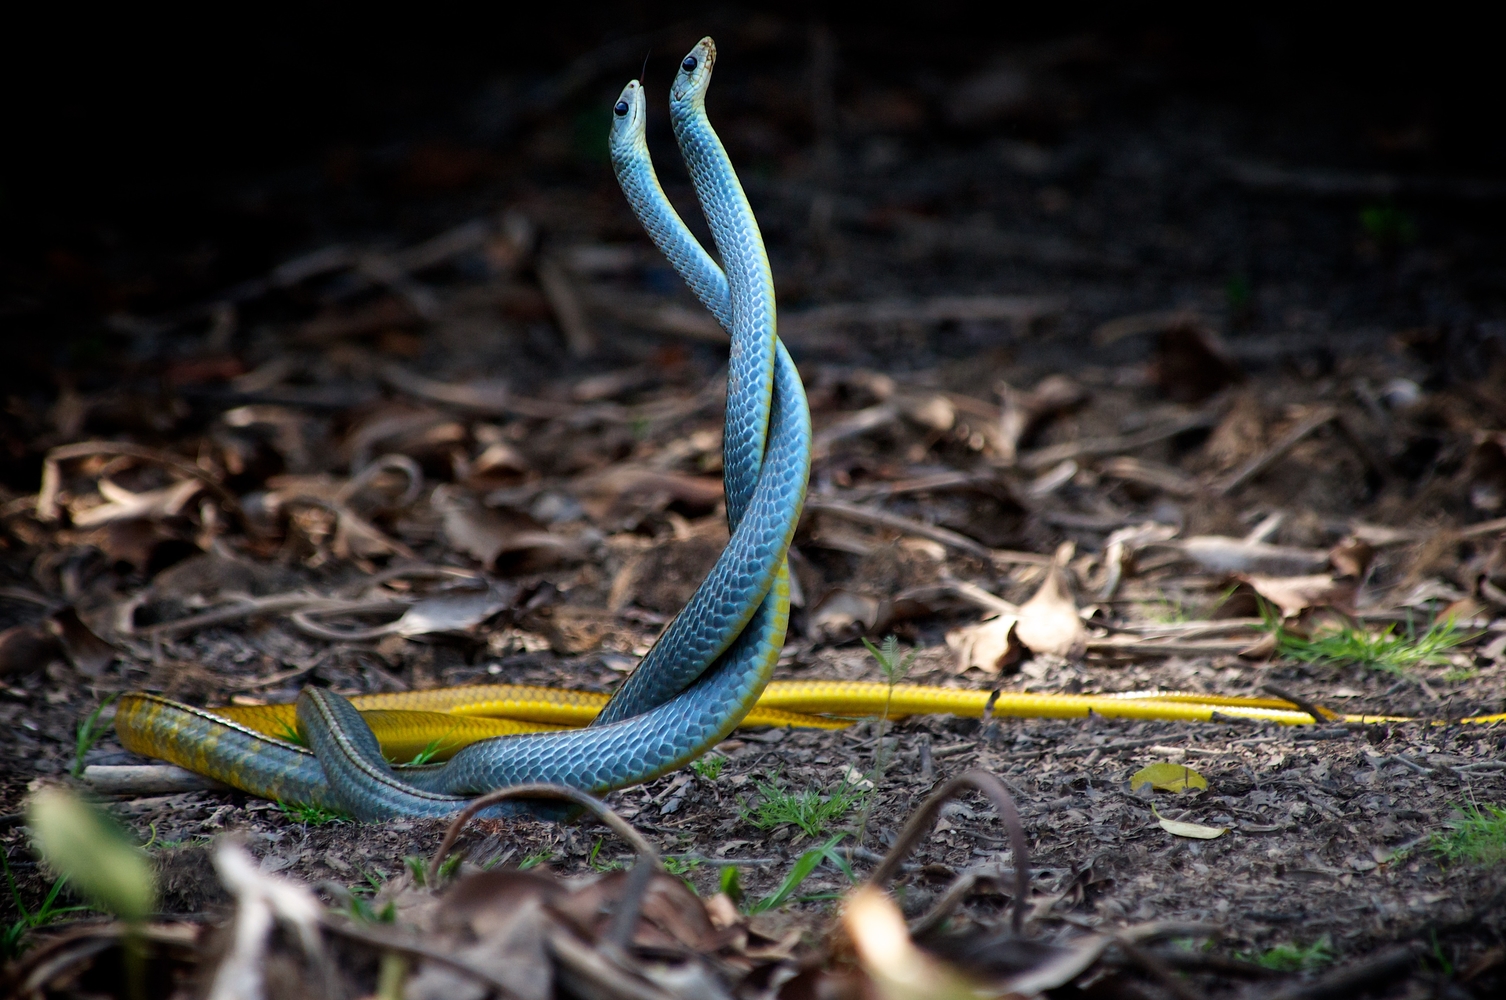 Blue snakes intertwined